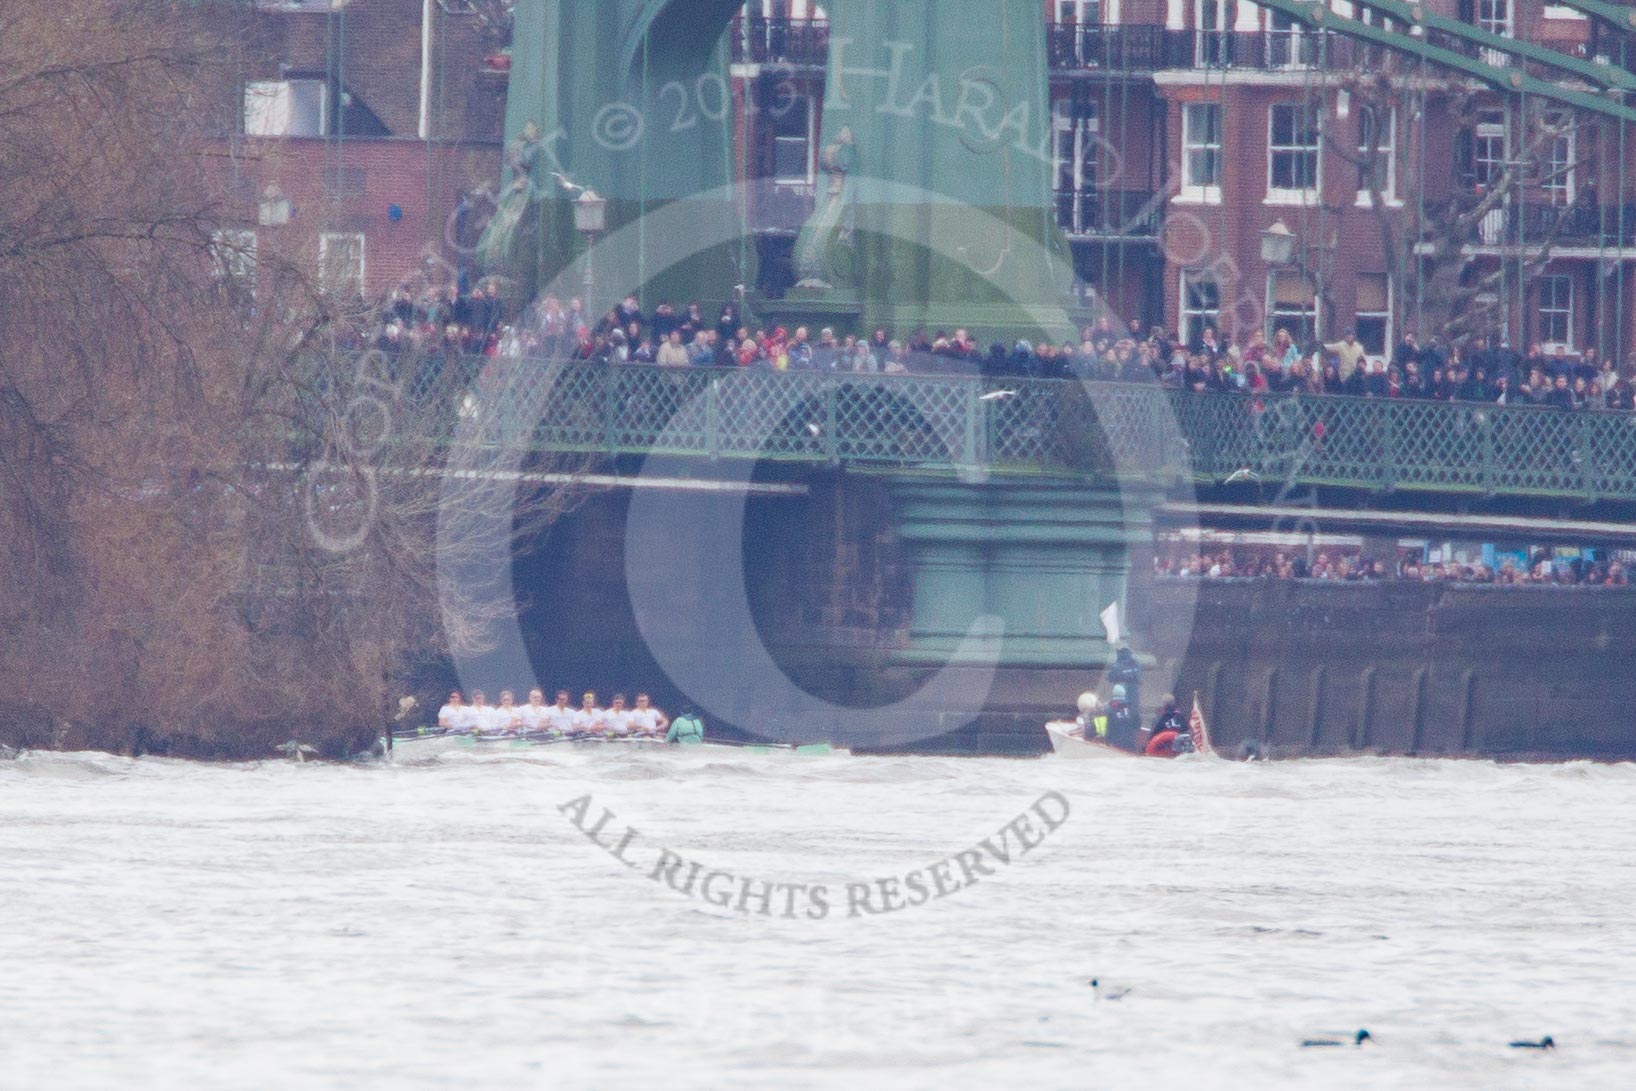 The Boat Race 2013.
Putney,
London SW15,

United Kingdom,
on 31 March 2013 at 16:06, image #221